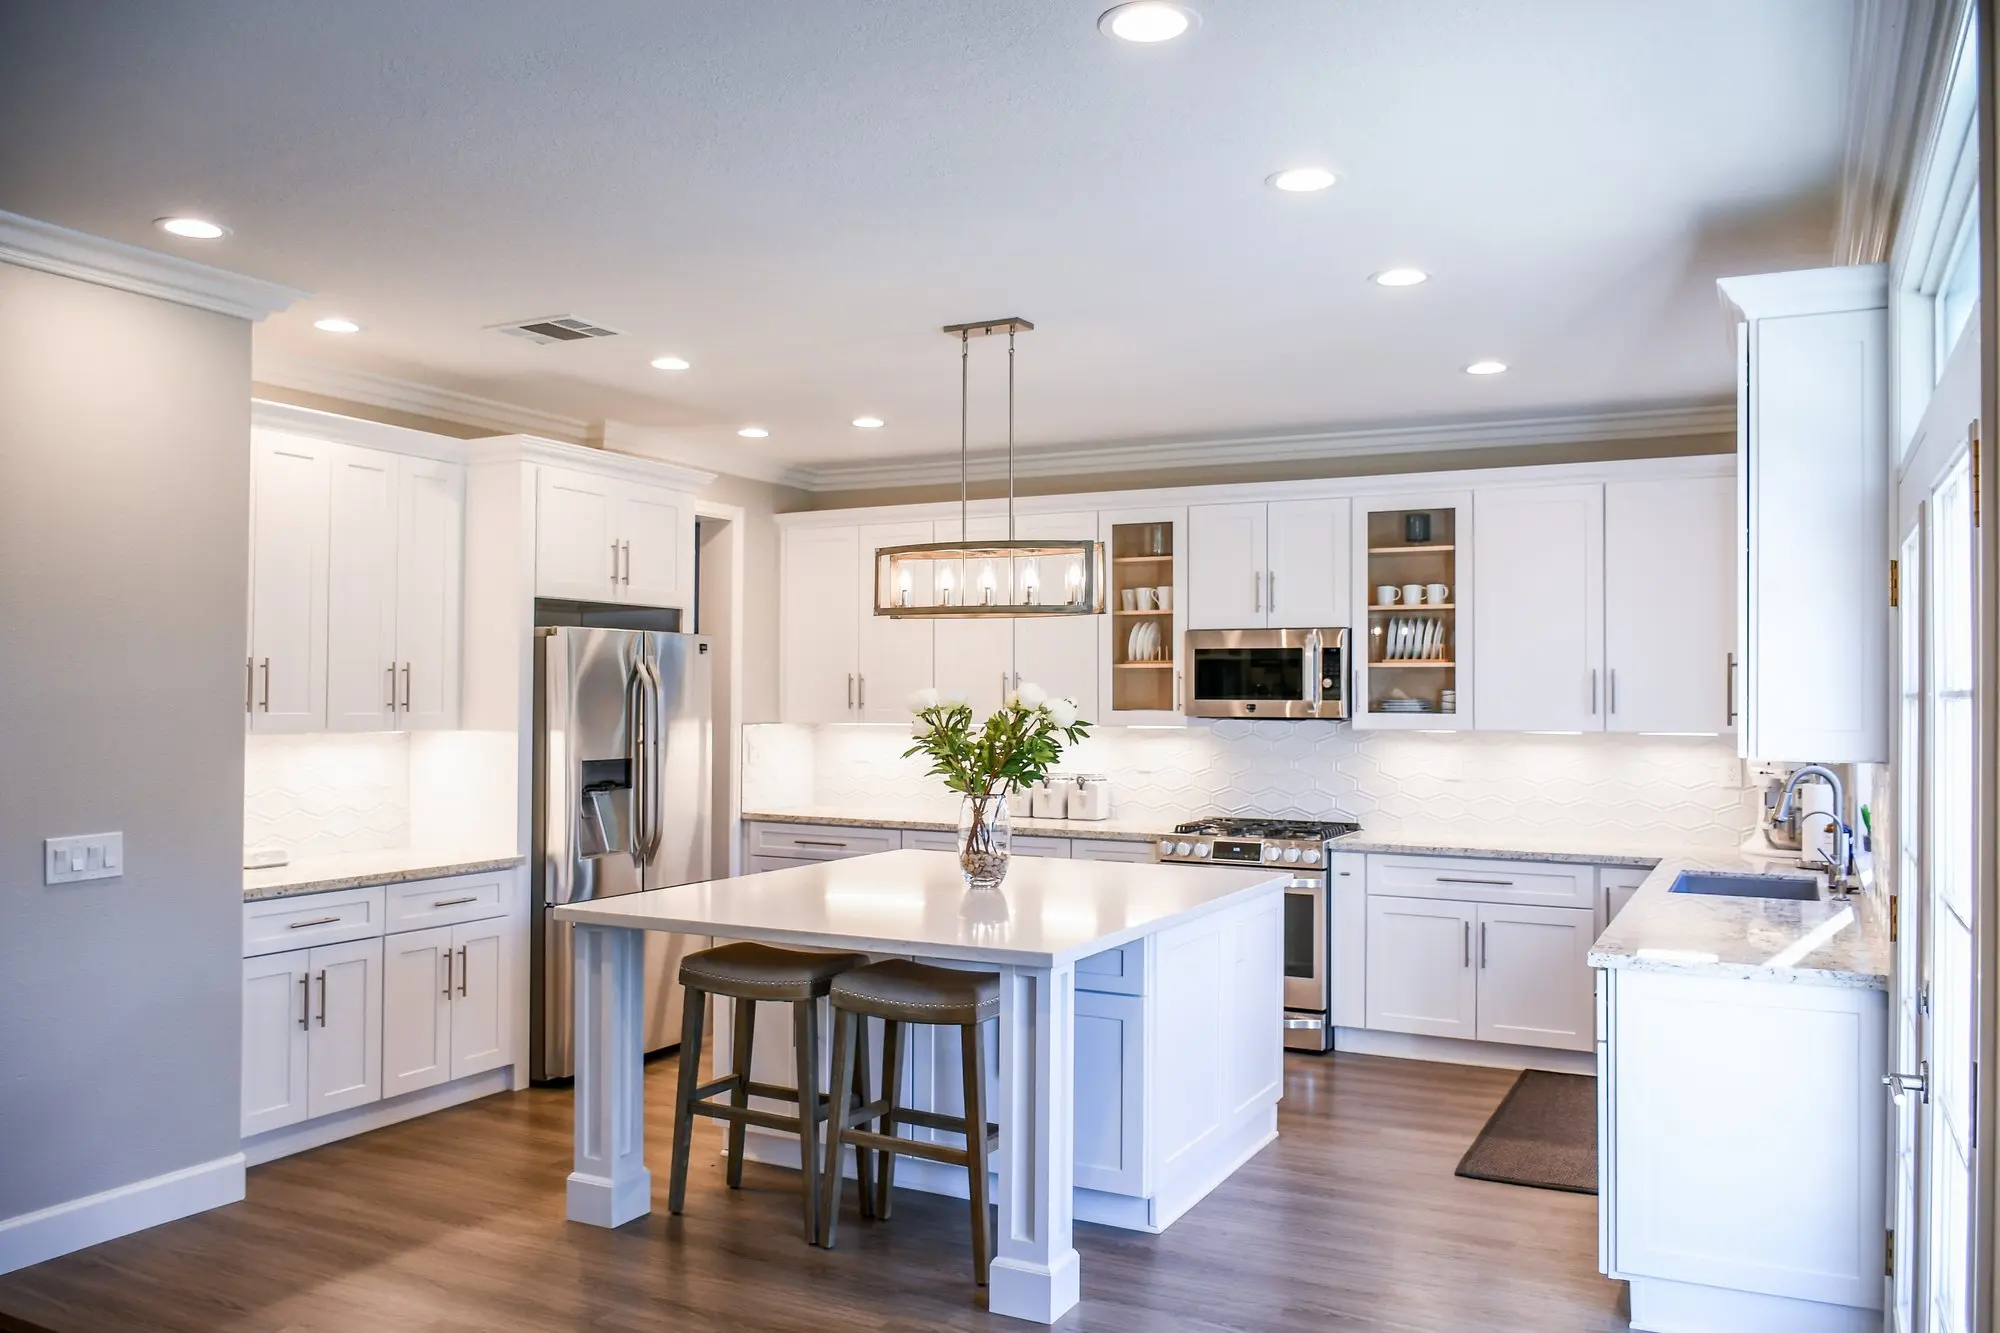 Kitchen painted white with stainless steel appliances | Spyglass Realty